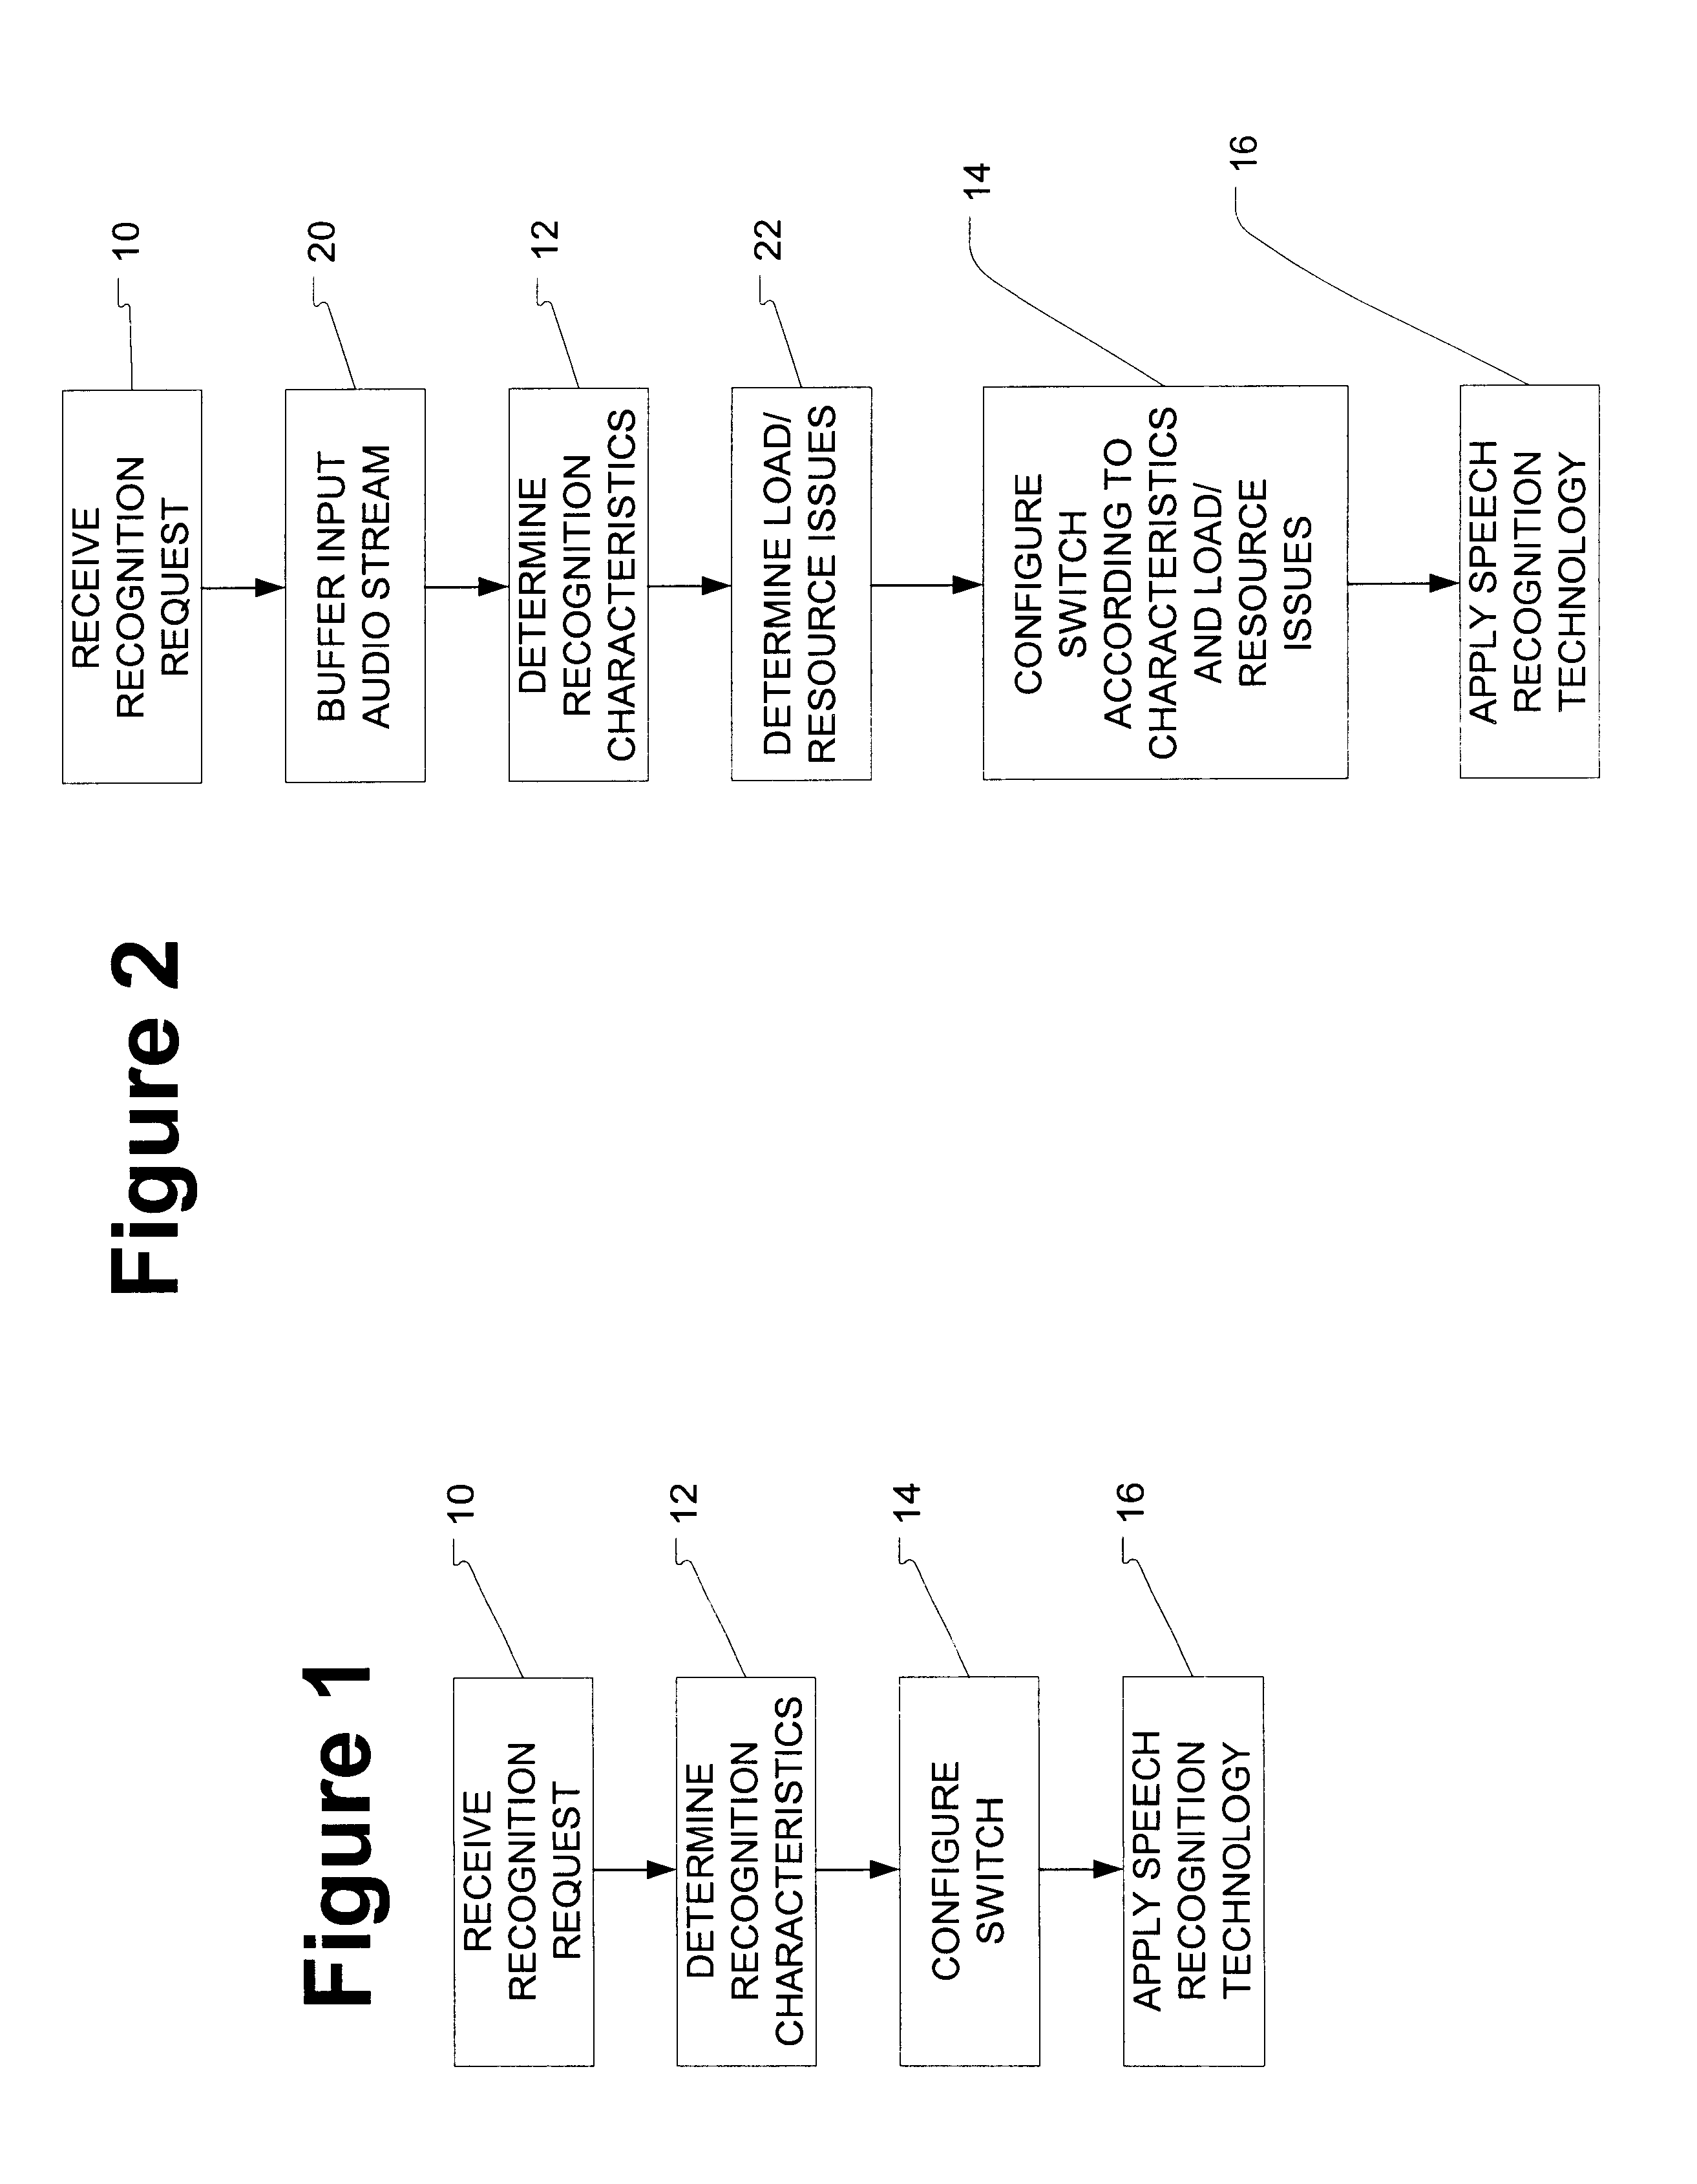 Method for automatically and dynamically switching between speech technologies